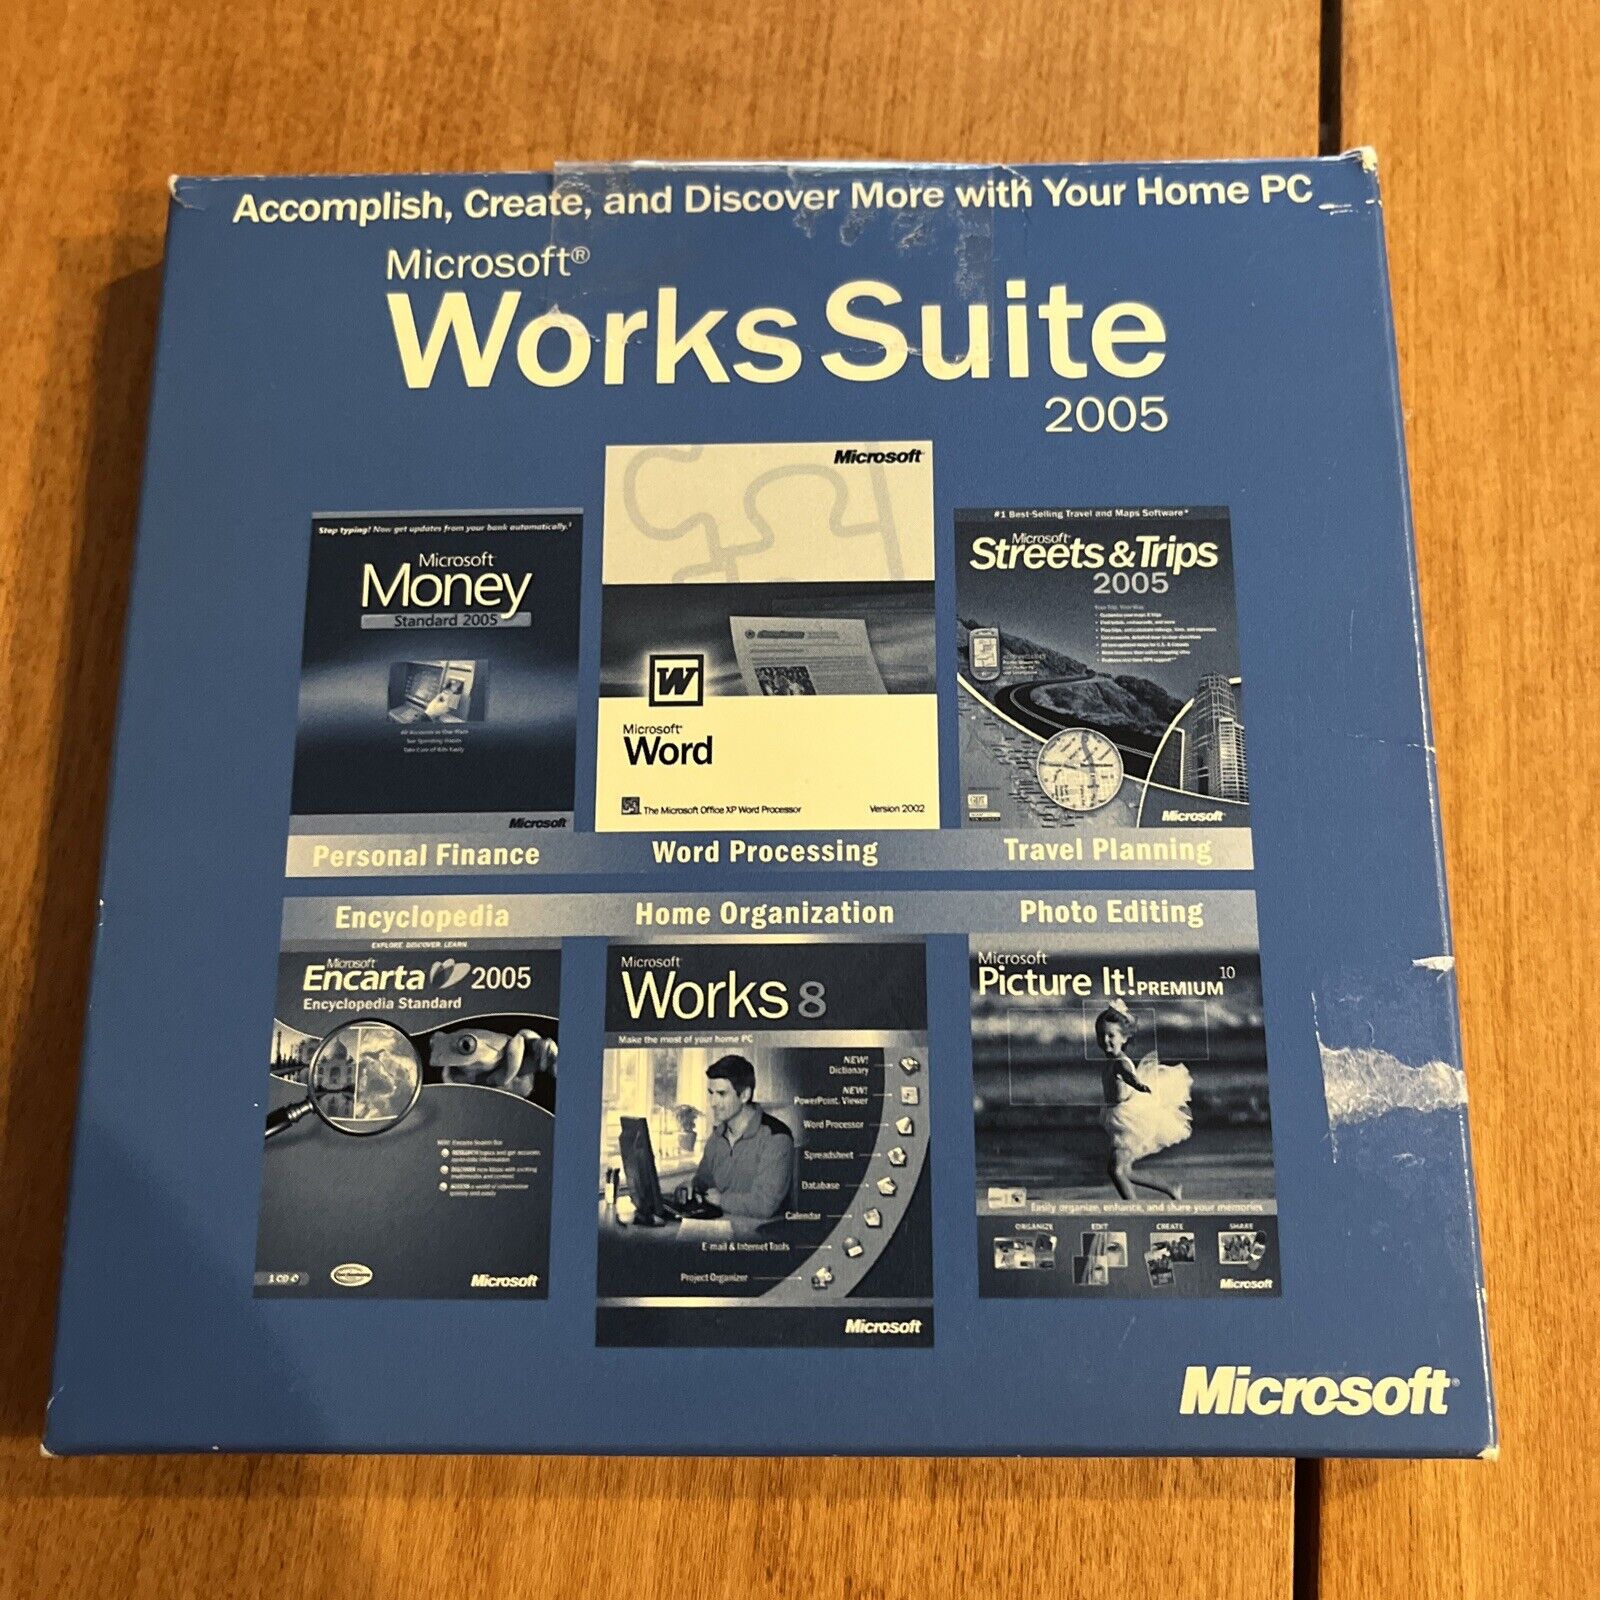 MICROSOFT WORKS SUITE 2005 - 5 CD'S - WITH PRODUCT KEY Dell